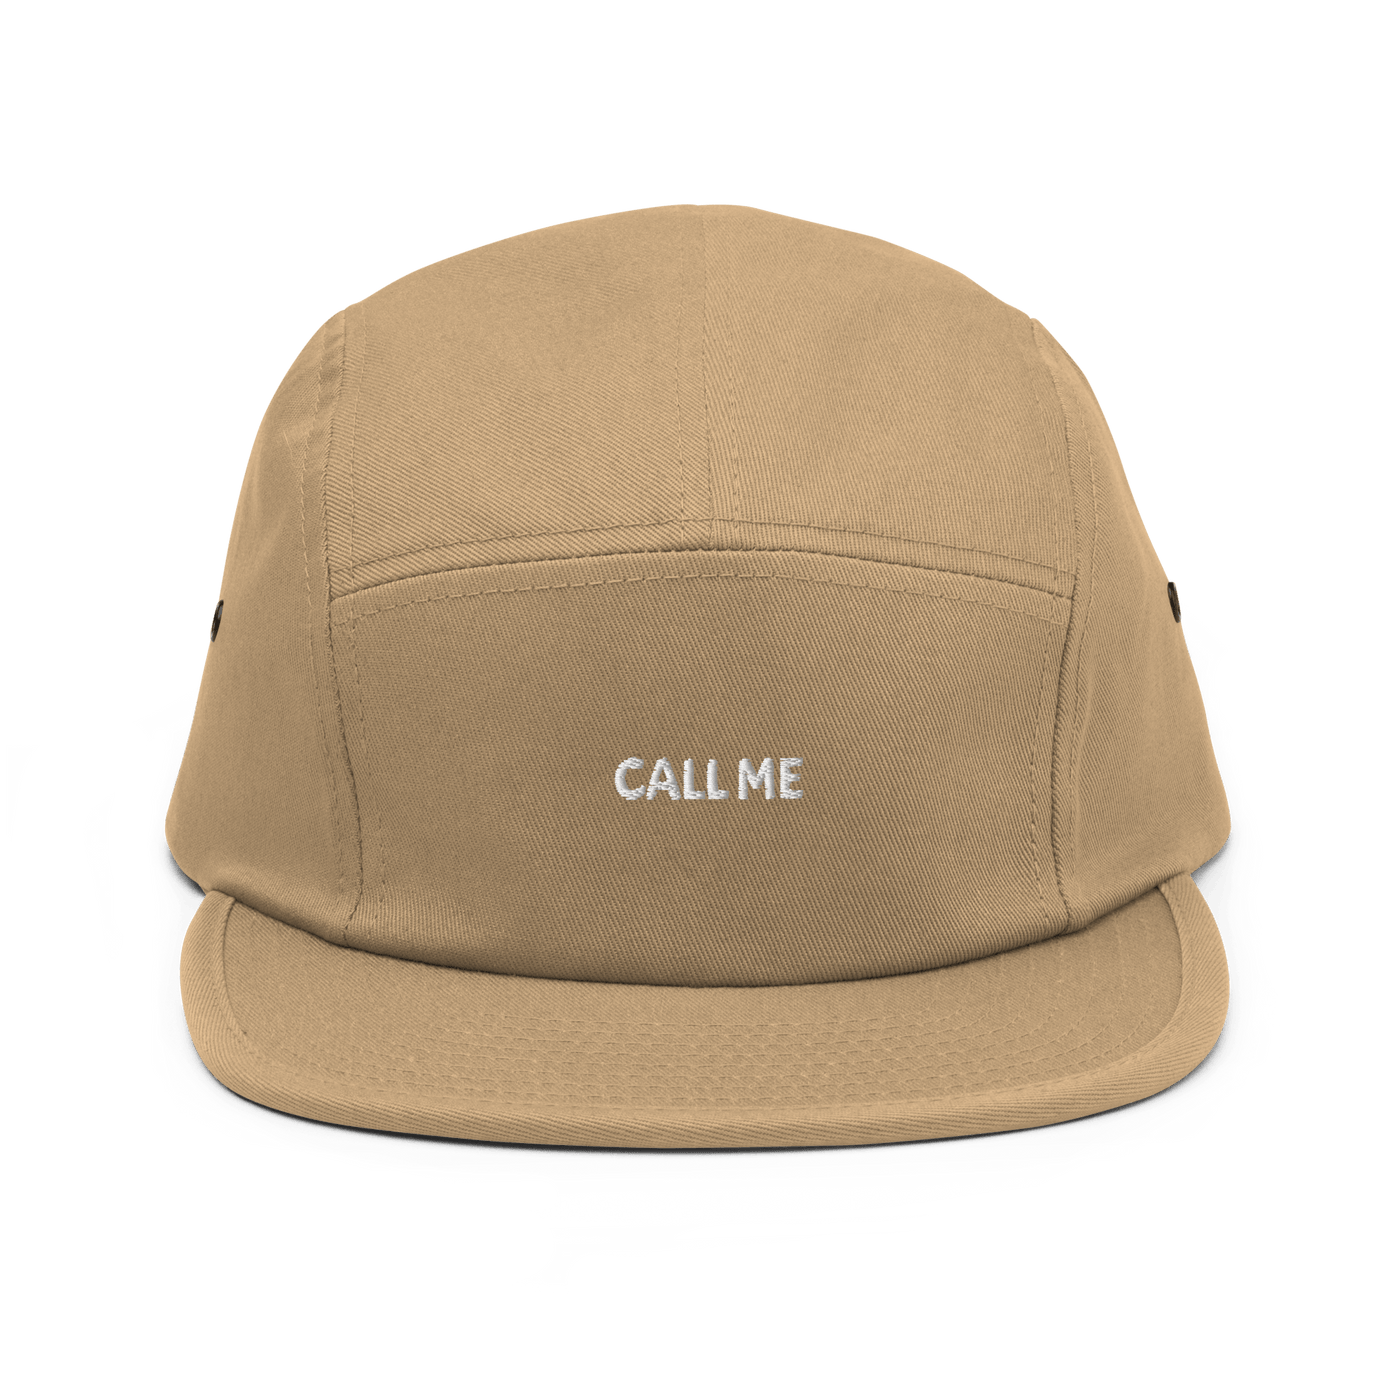 Call Me Five Panel Cap - Olive - - Just Another Cap Store